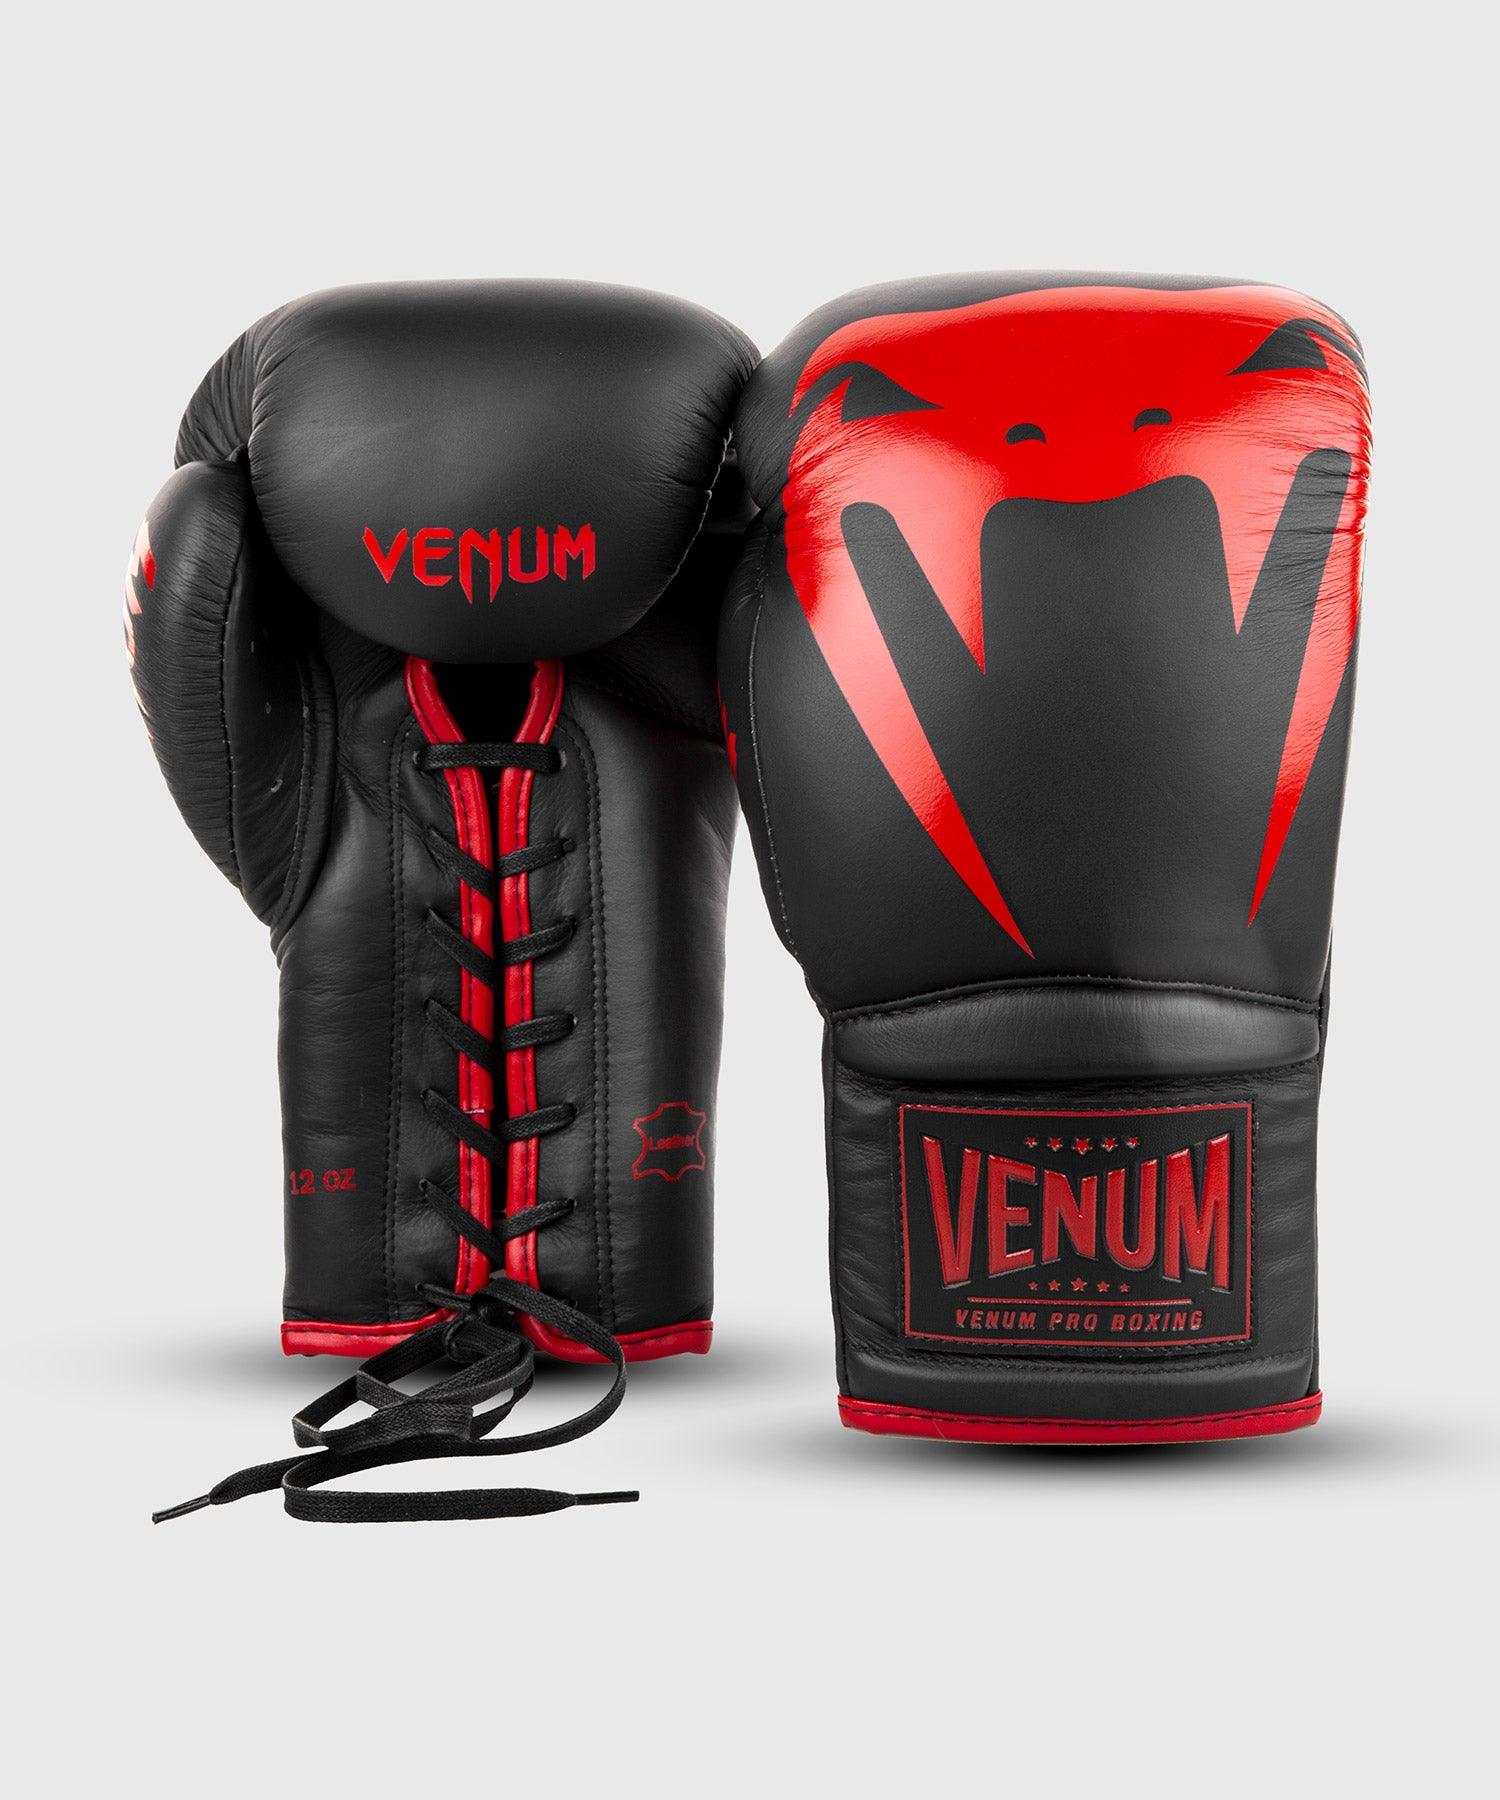 Venum Giant 2.0 Pro Boxing Gloves - With Laces - Black/Red Picture 3